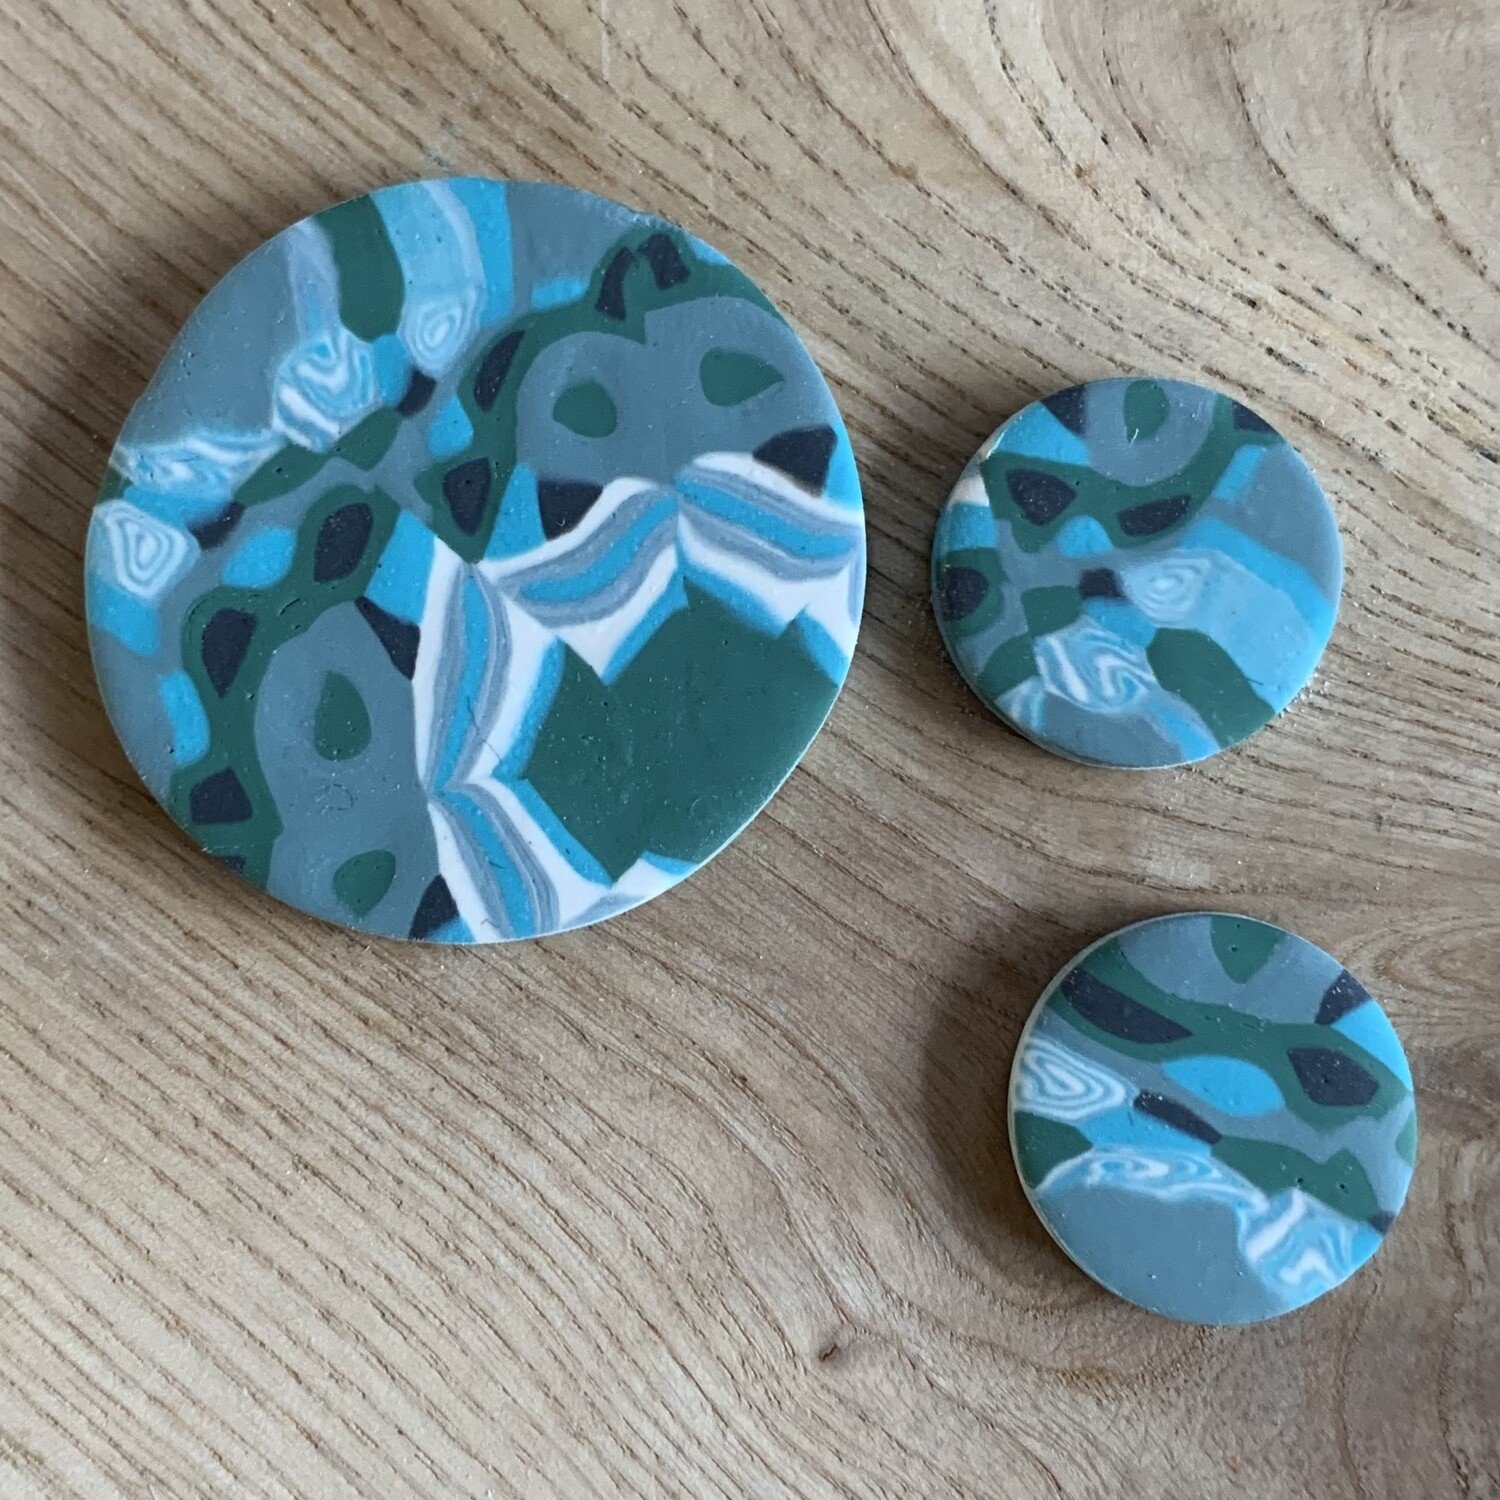 Beginner Polymer Clay Jewellery - One to One - 3 Hours